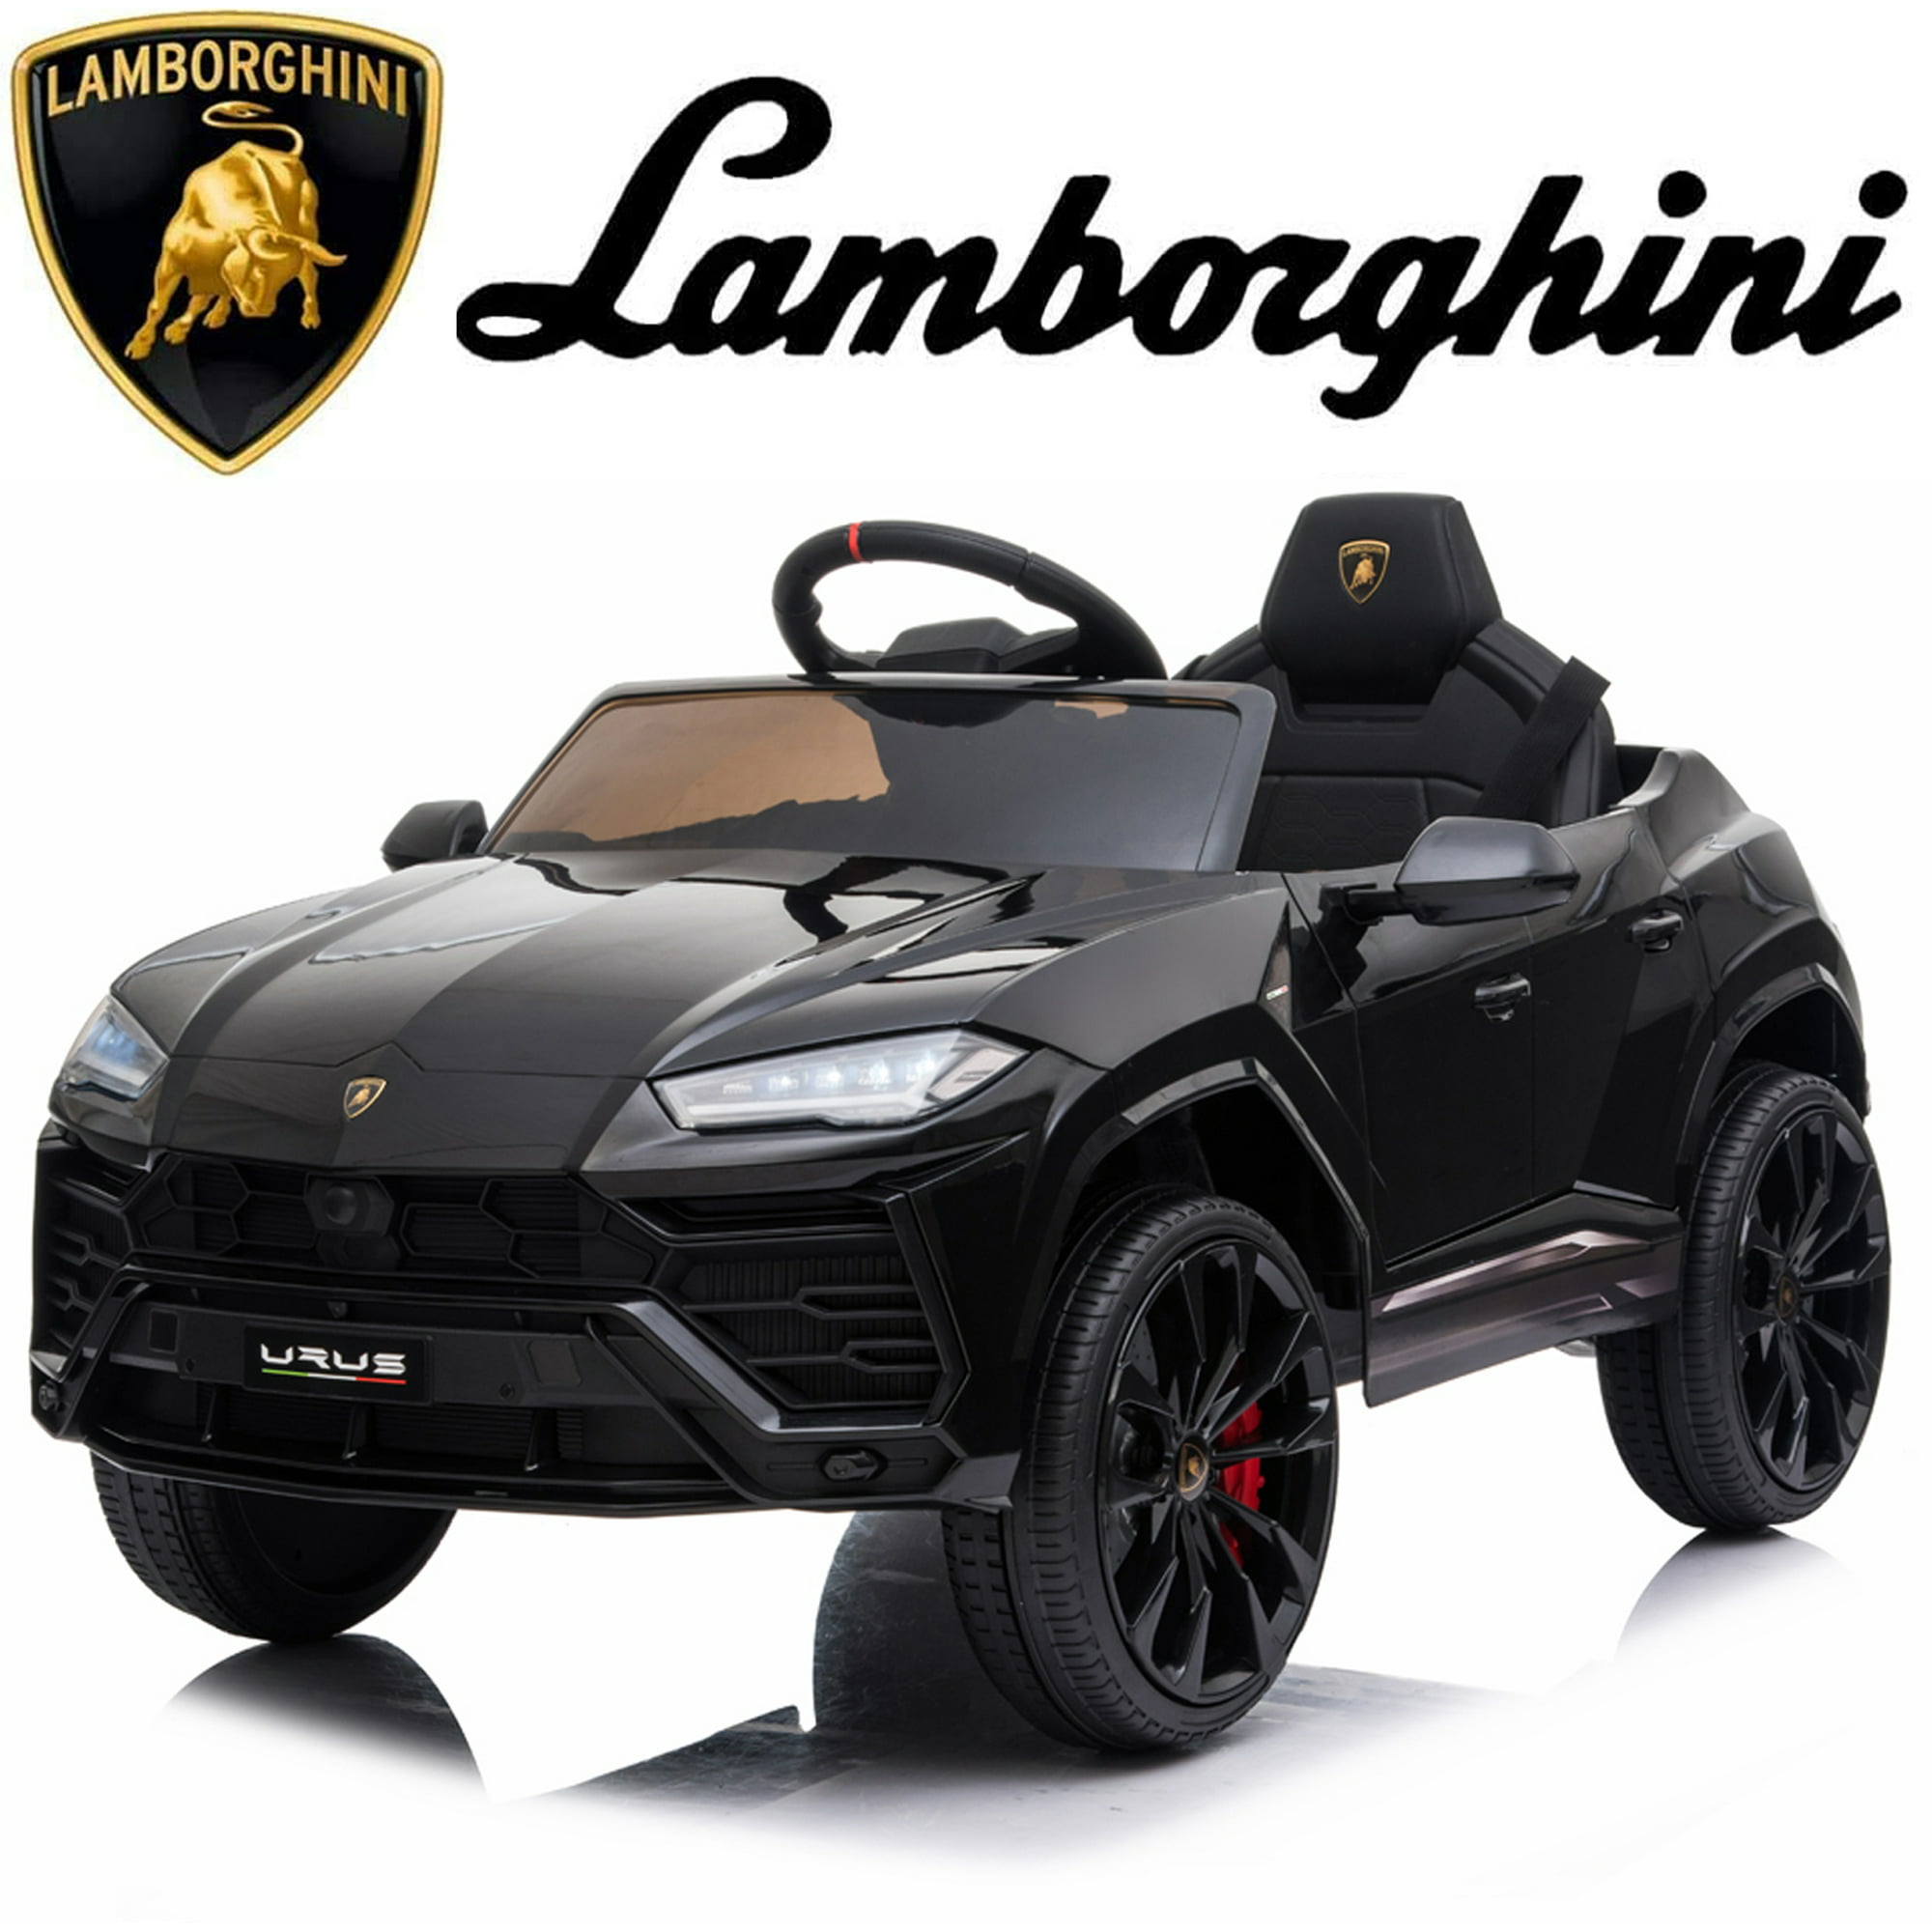 Lamborghini 12V Kids' Electric Powered Ride-on-Car w/ Parent Control Remote, Radio, Lights, & Horn (Various Colors) $166 + Free Shipping